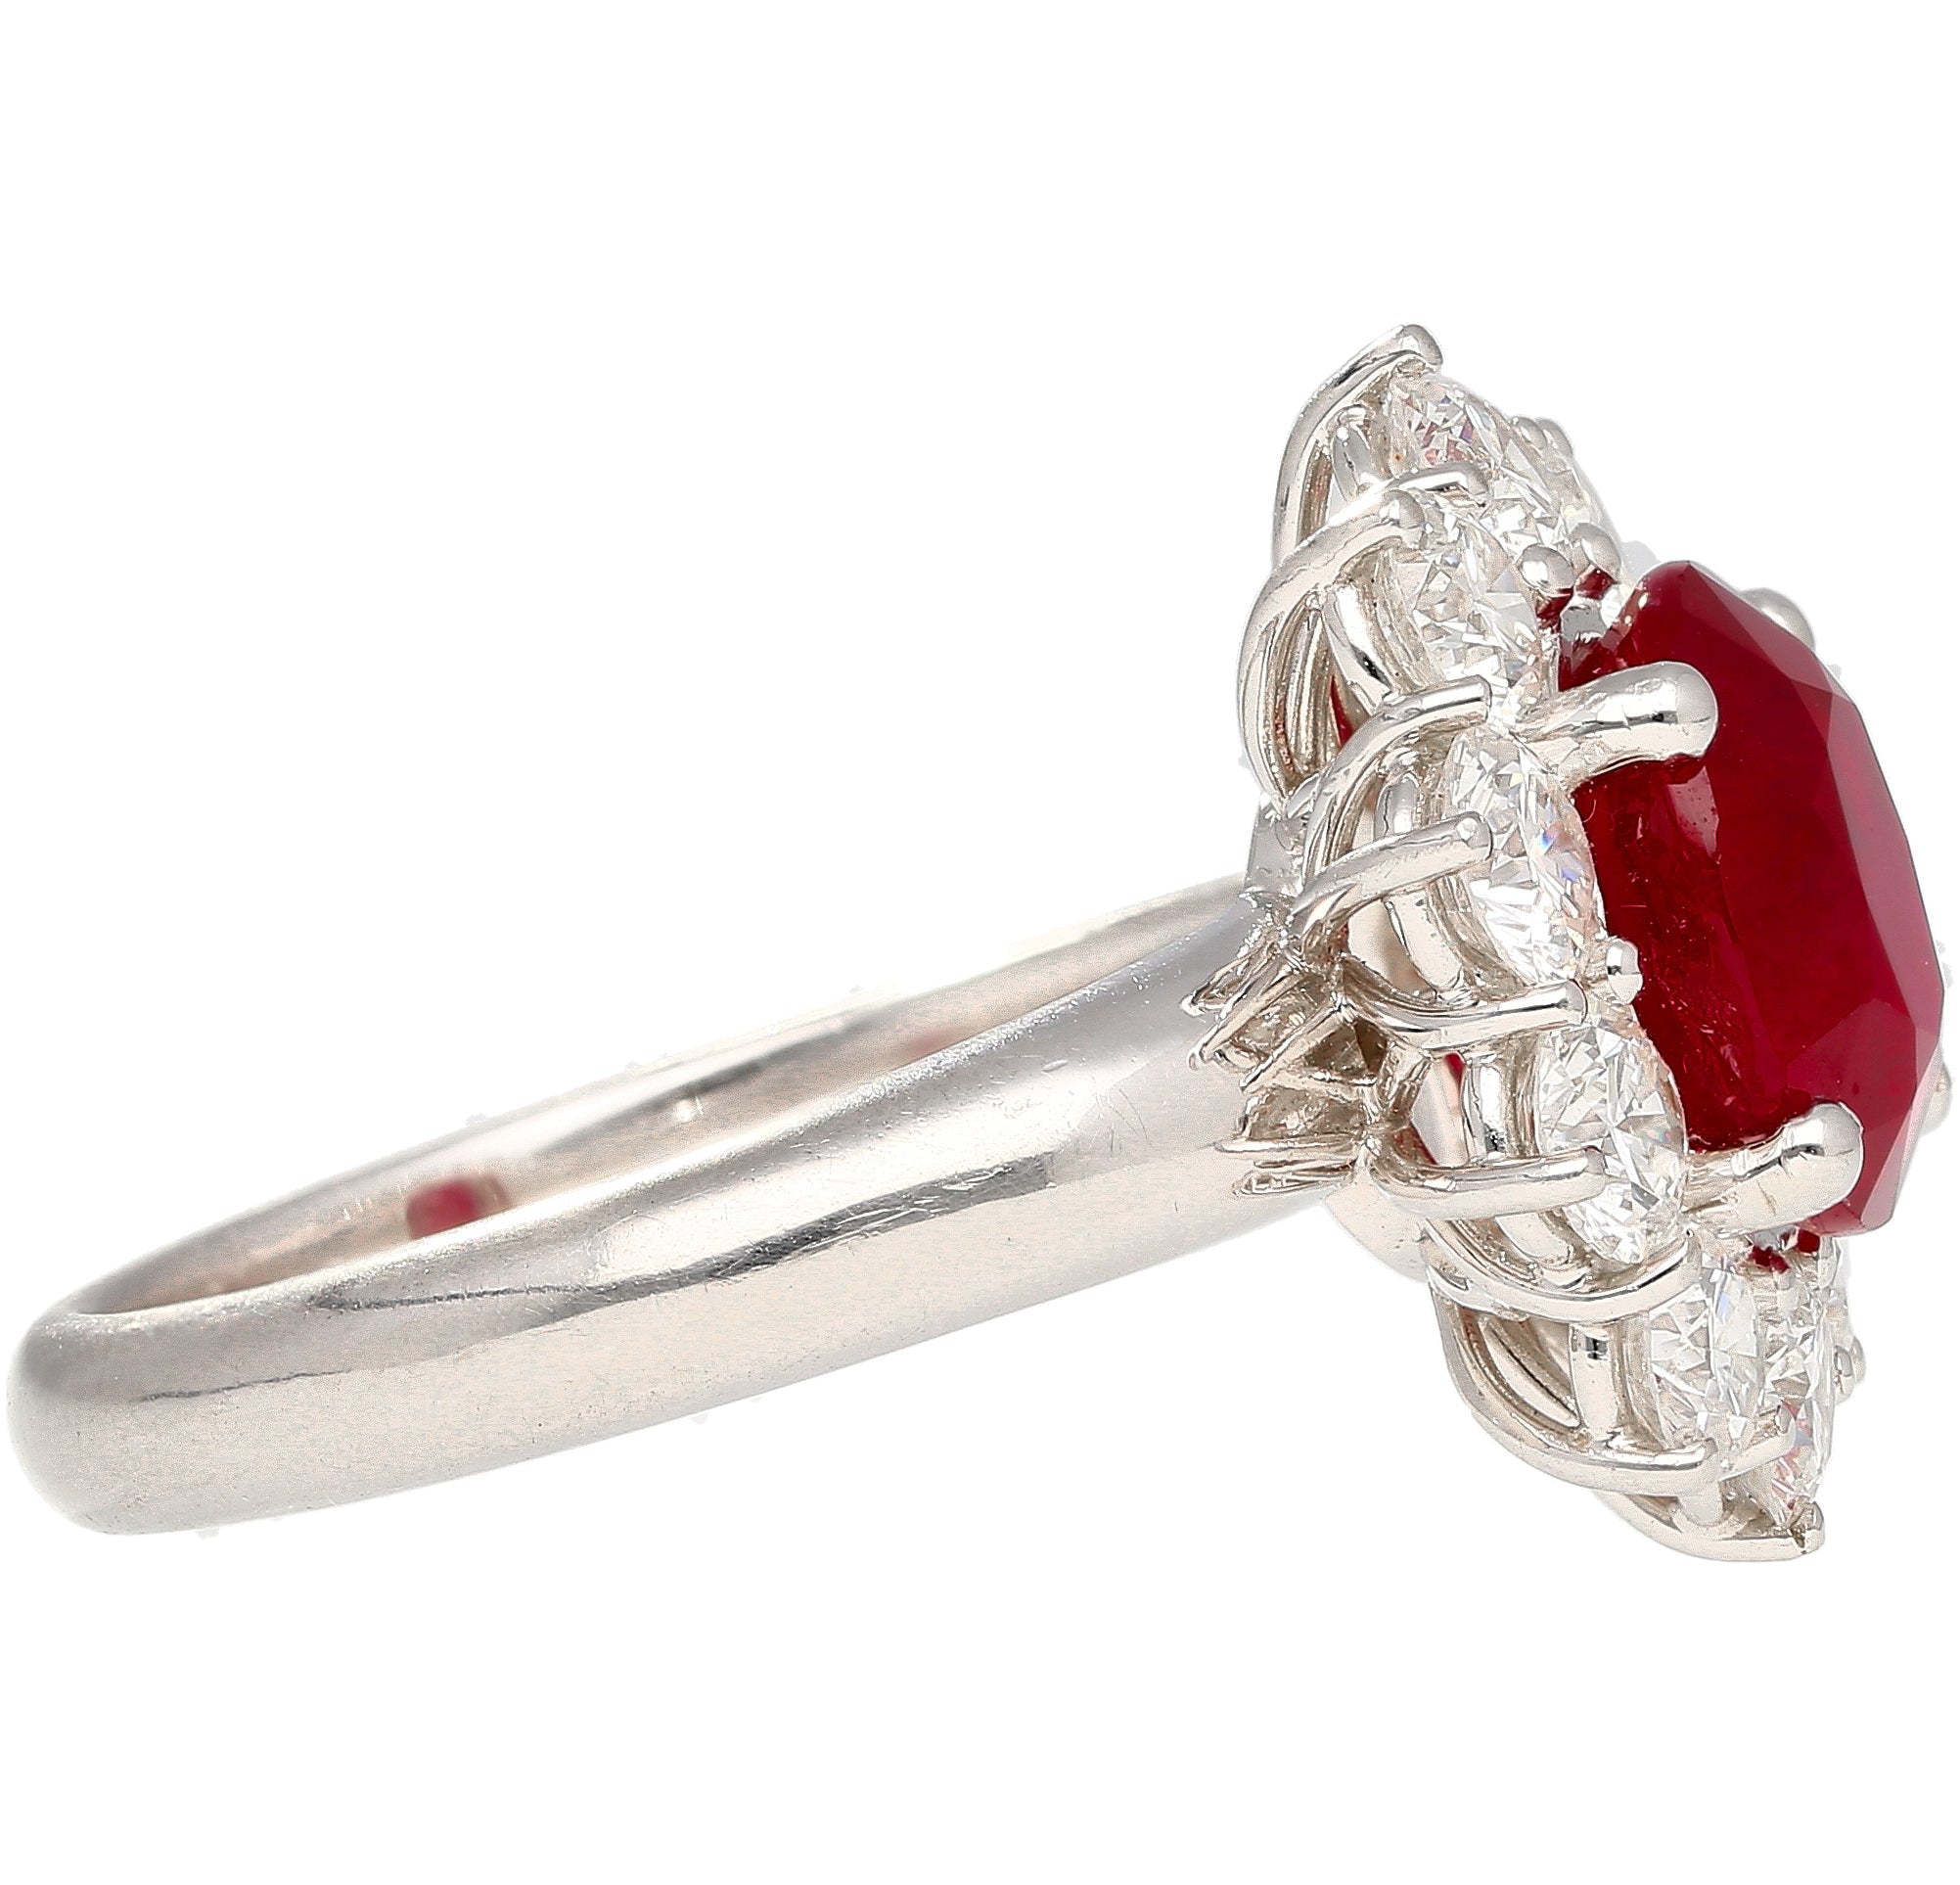 GRS Certified 3 carat Vivid Red "Pigeon Blood" Oval Cut Burma Ruby Ring with Diamond Halo